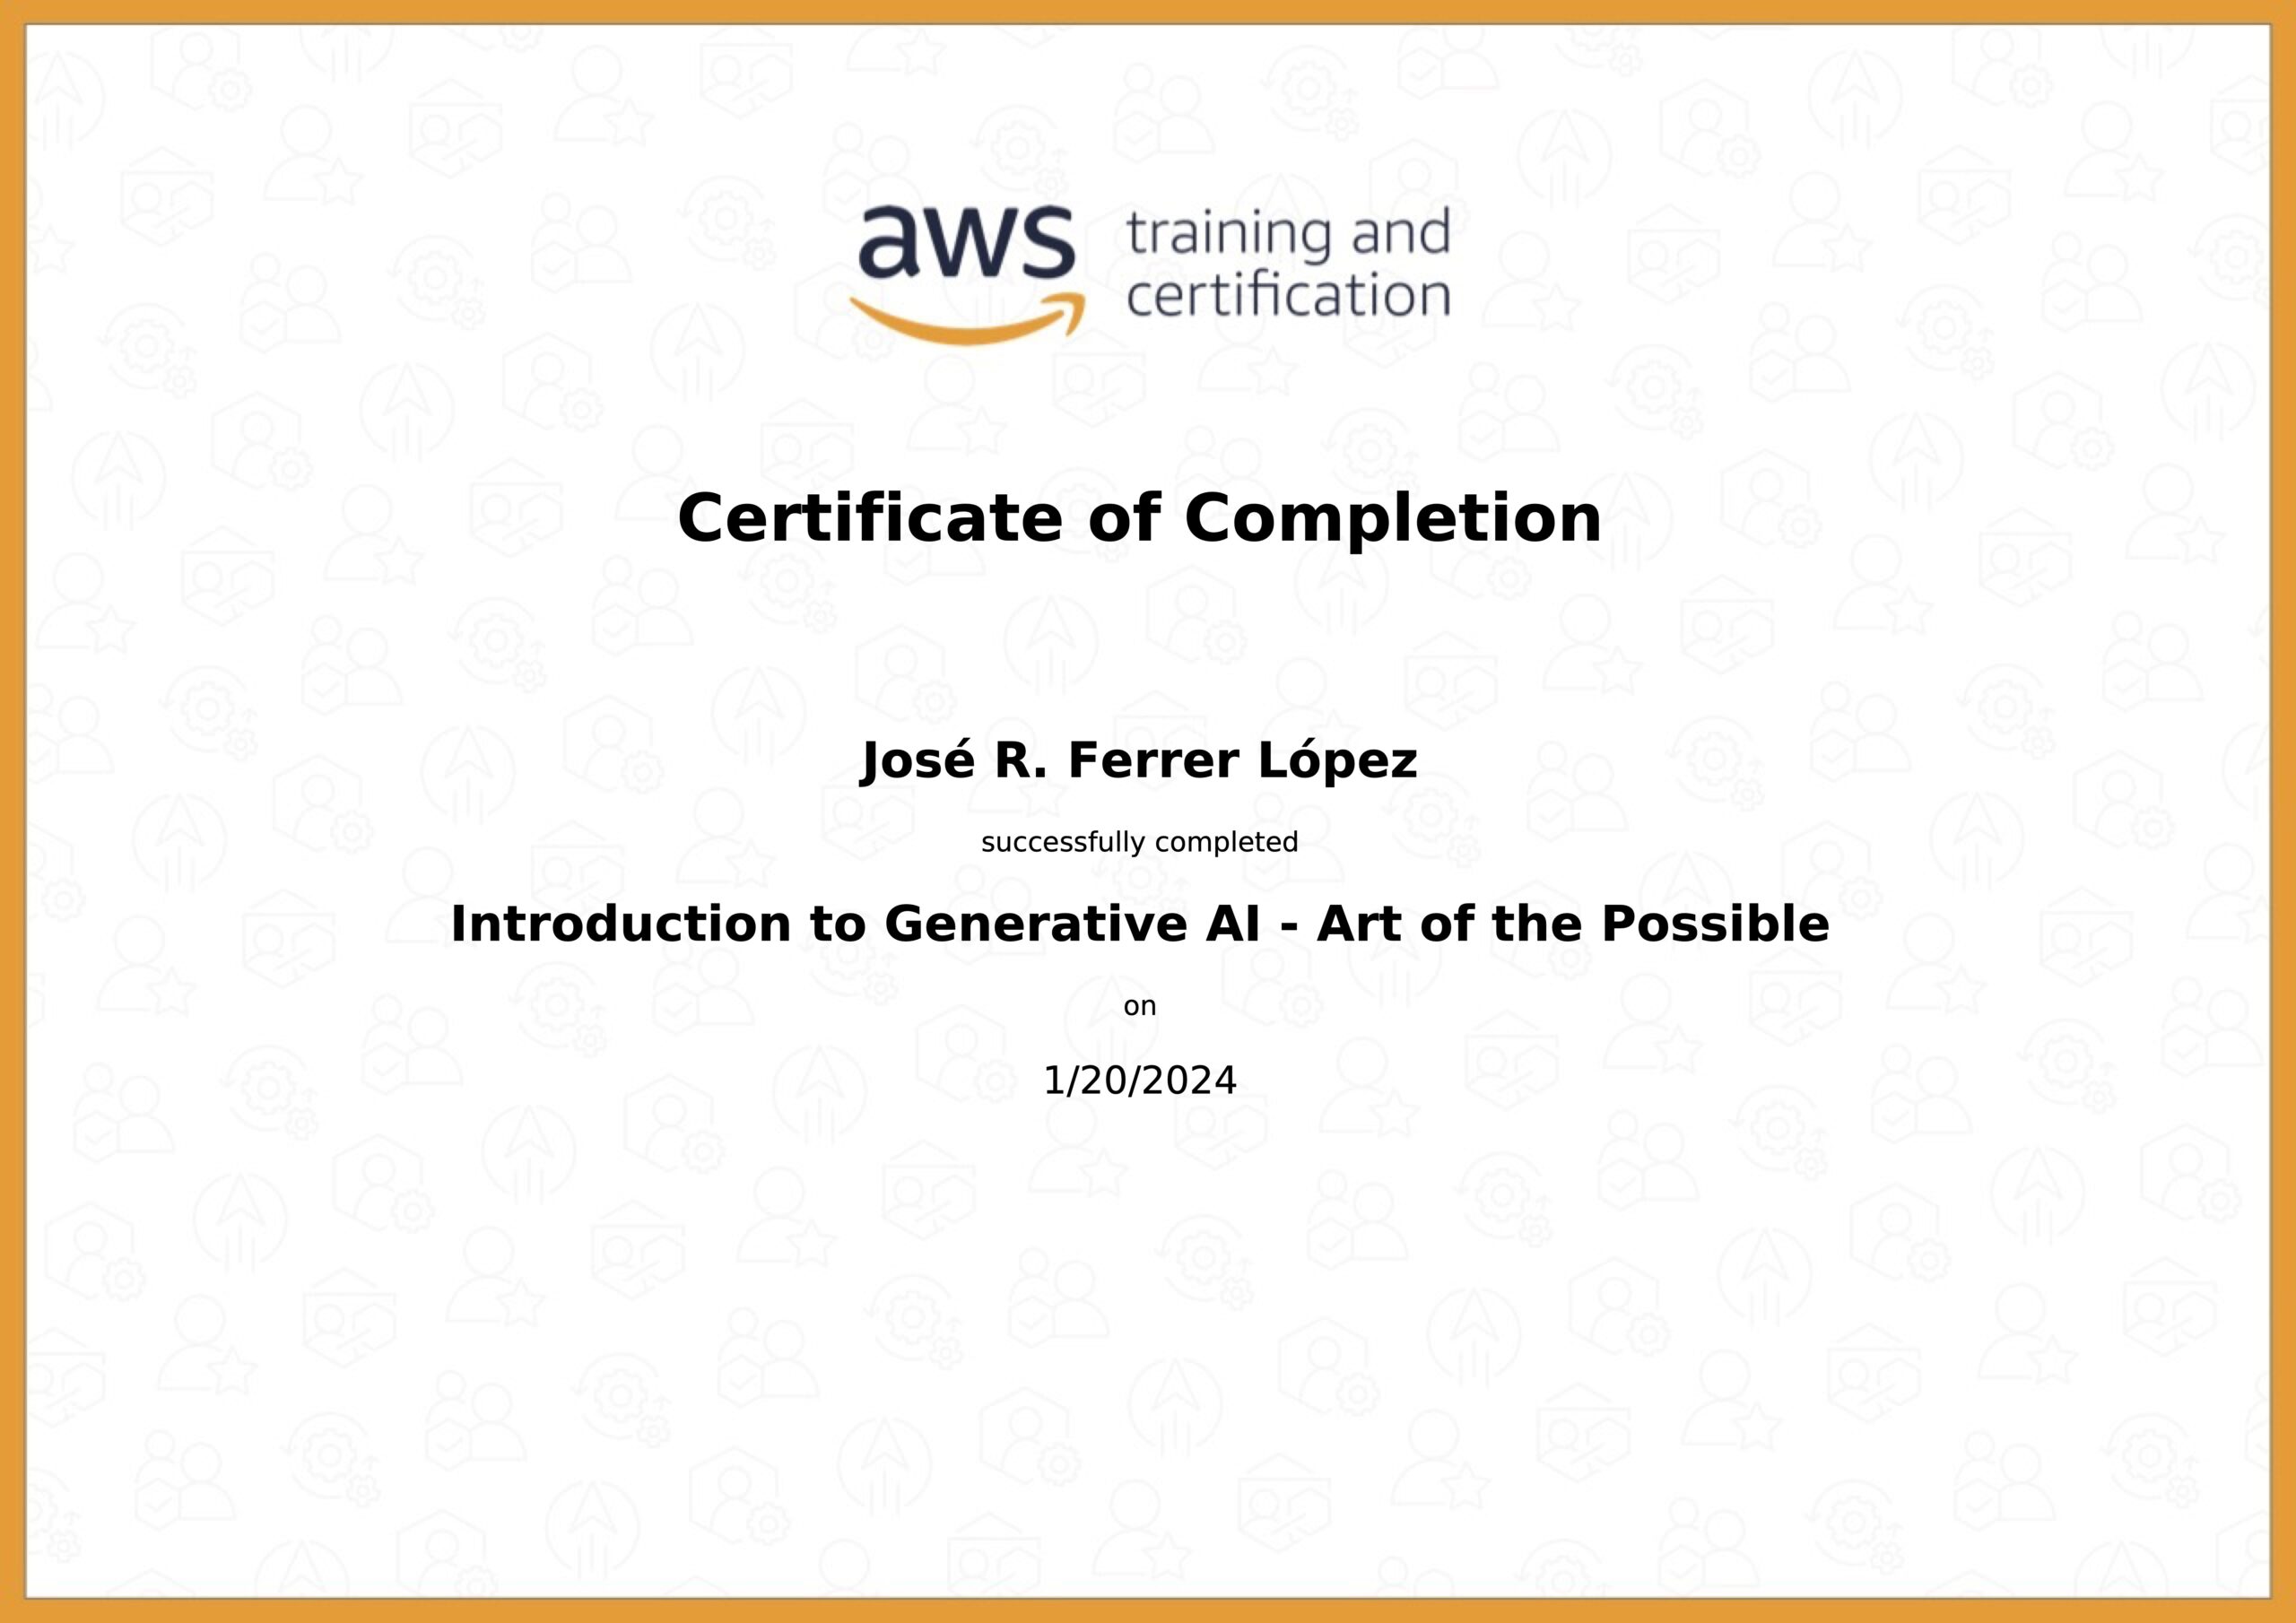 17176_5_4821872_1705771995_AWS Skill Builder Course Completion Certificate